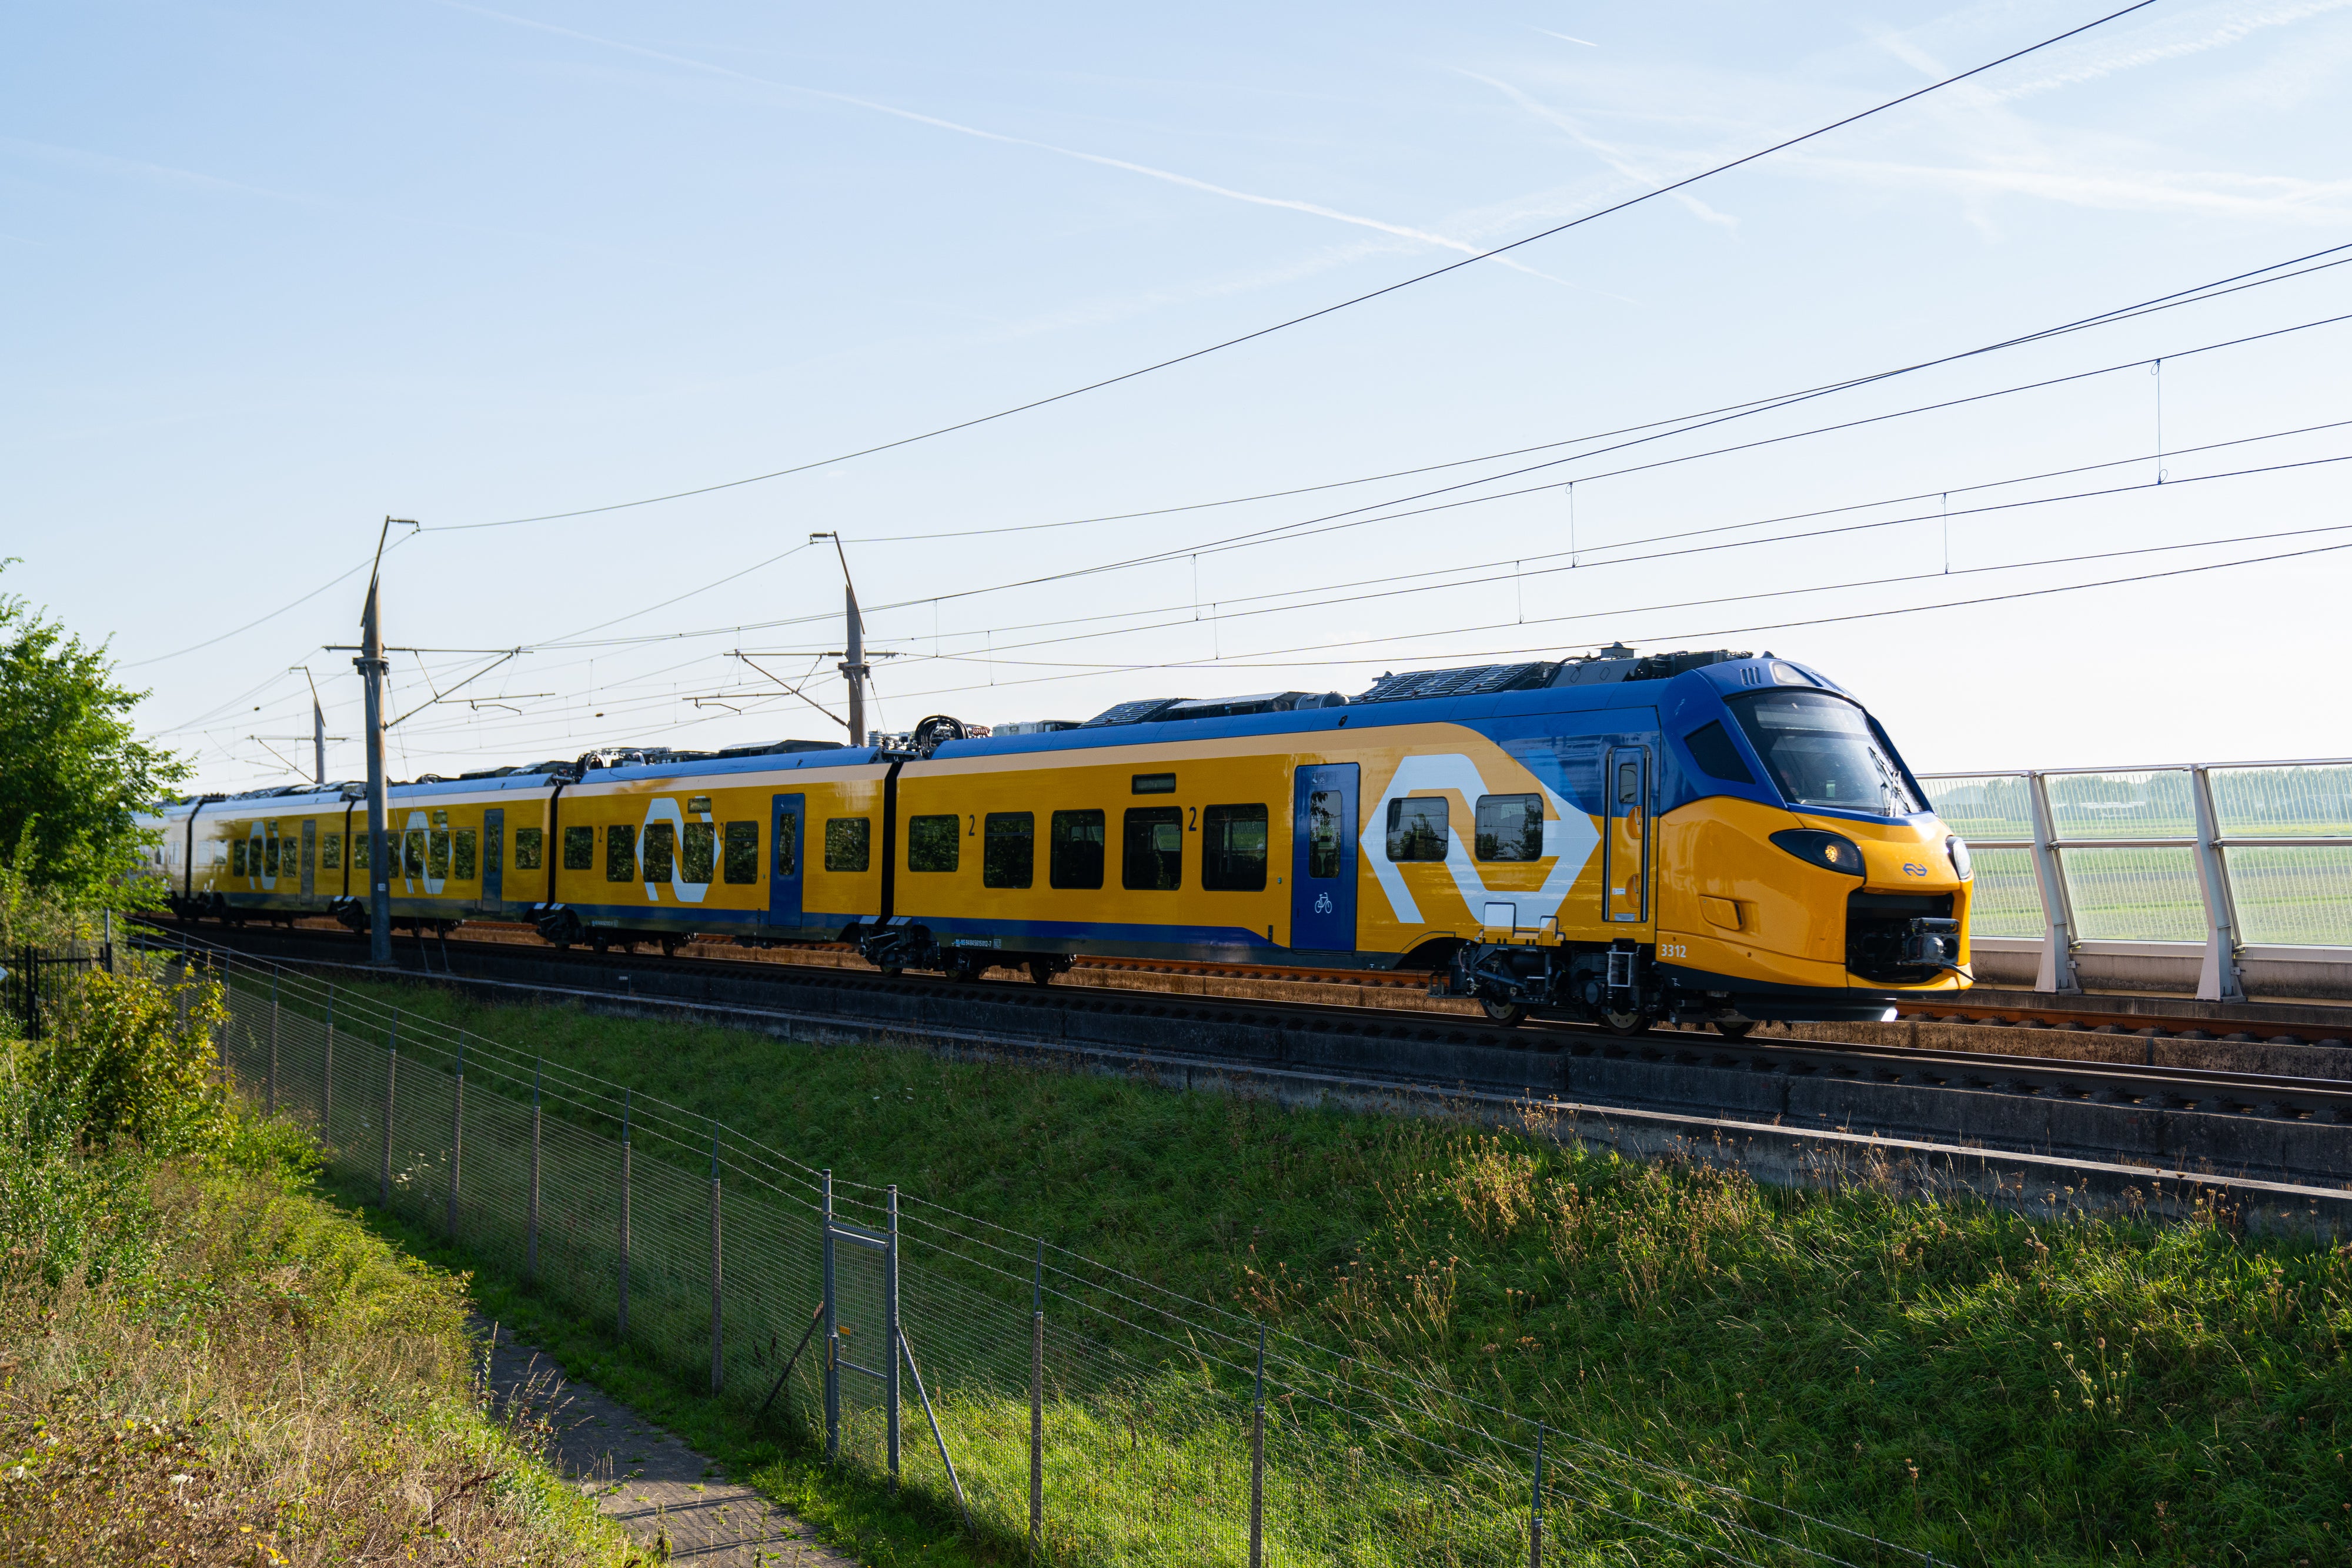 Brussels to Amsterdam train services are doubling